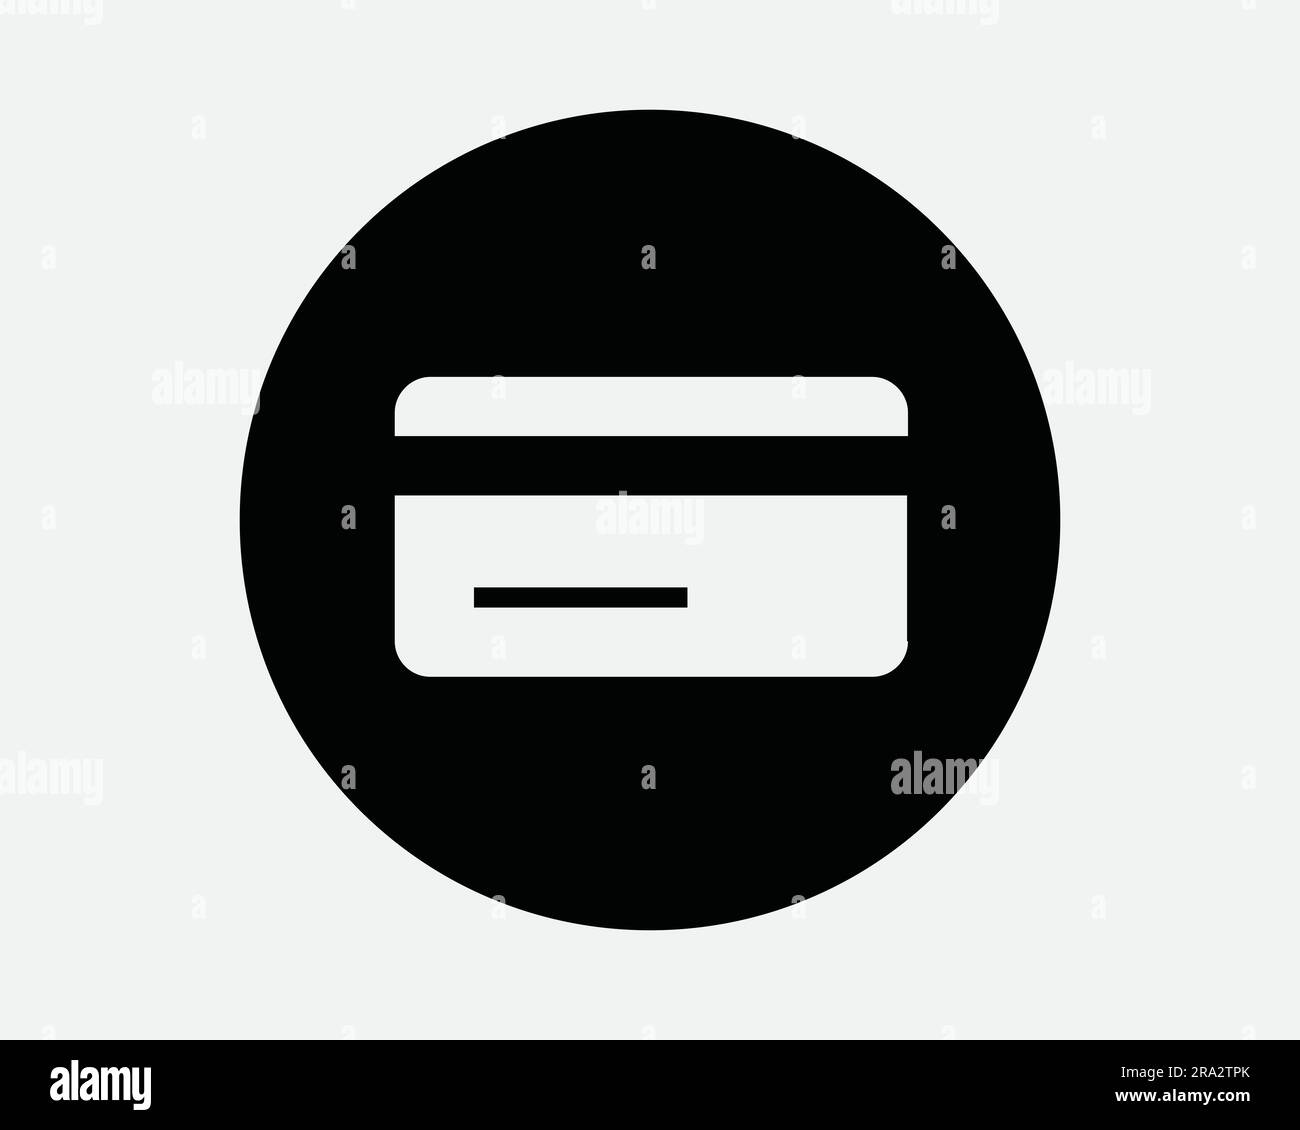 Credit Card Round Icon. Circle Circular Debit Plastic Business Bank Banking Payment ATM. Black White Graphic Clipart Artwork Symbol Sign Vector EPS Stock Vector